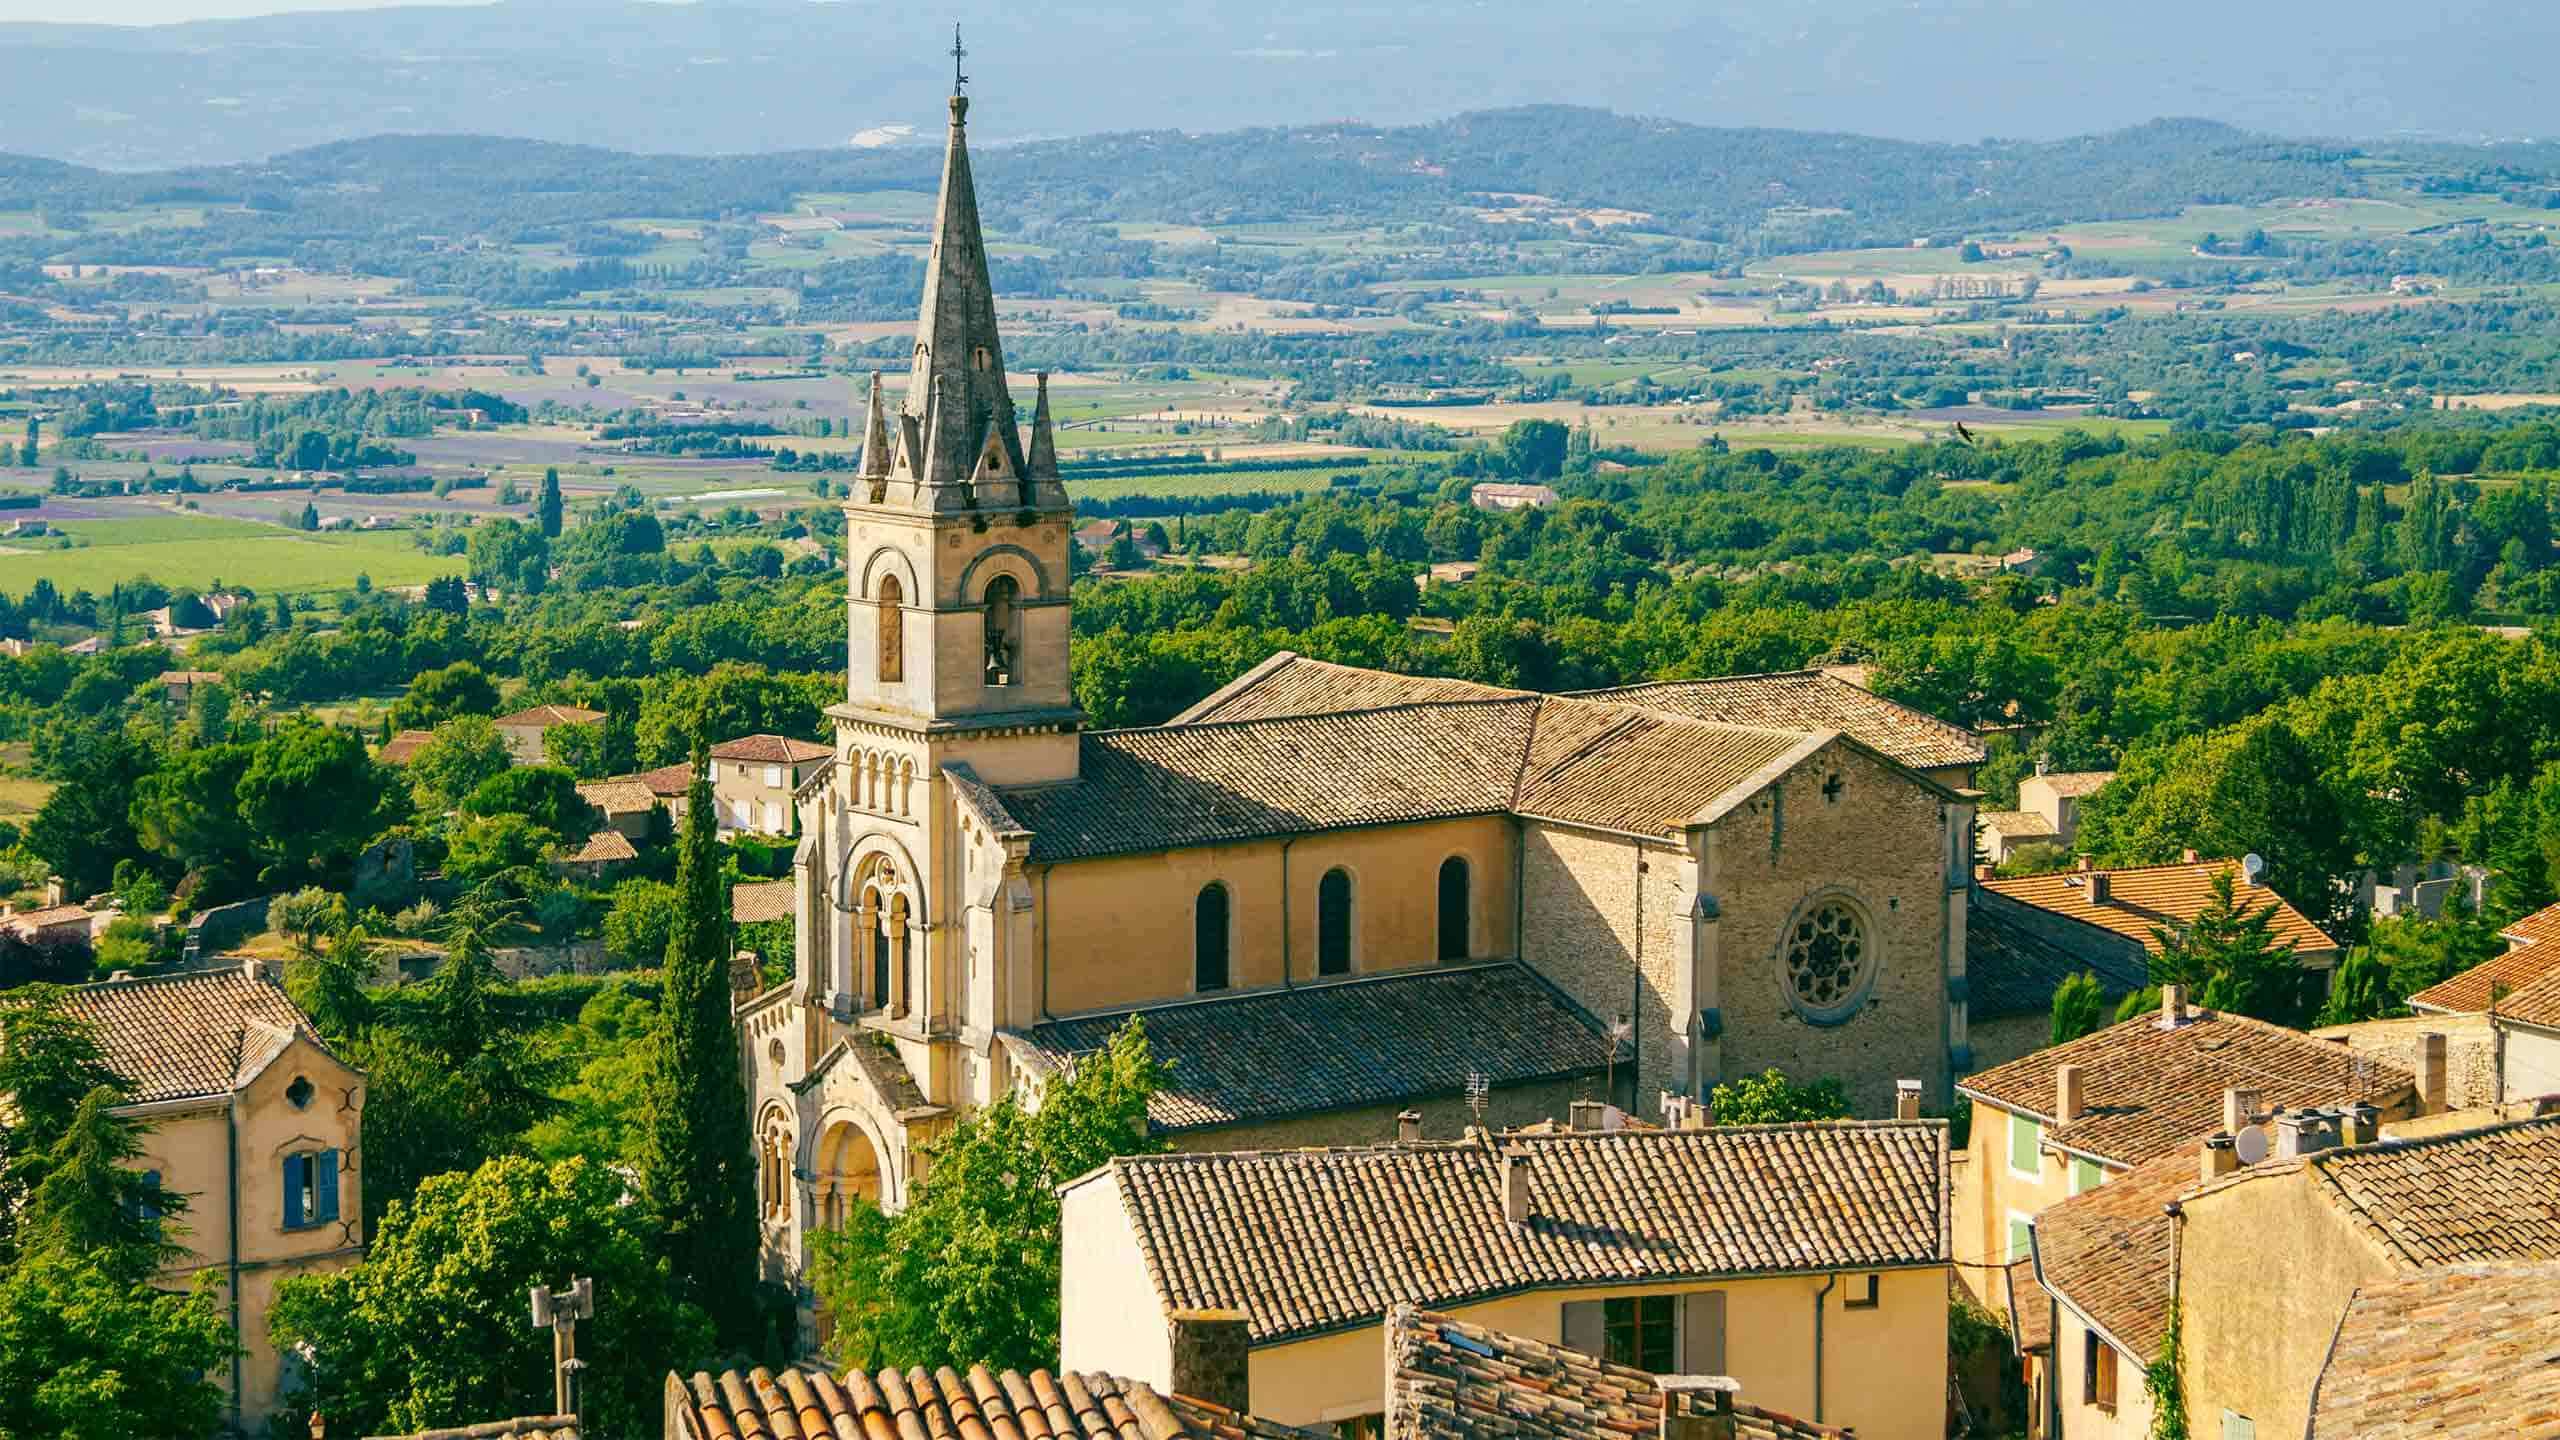 Luxury Provence Active Culinary Walk (Vibrant Markets & Beautiful Villages) 6D5N, Fully Guided